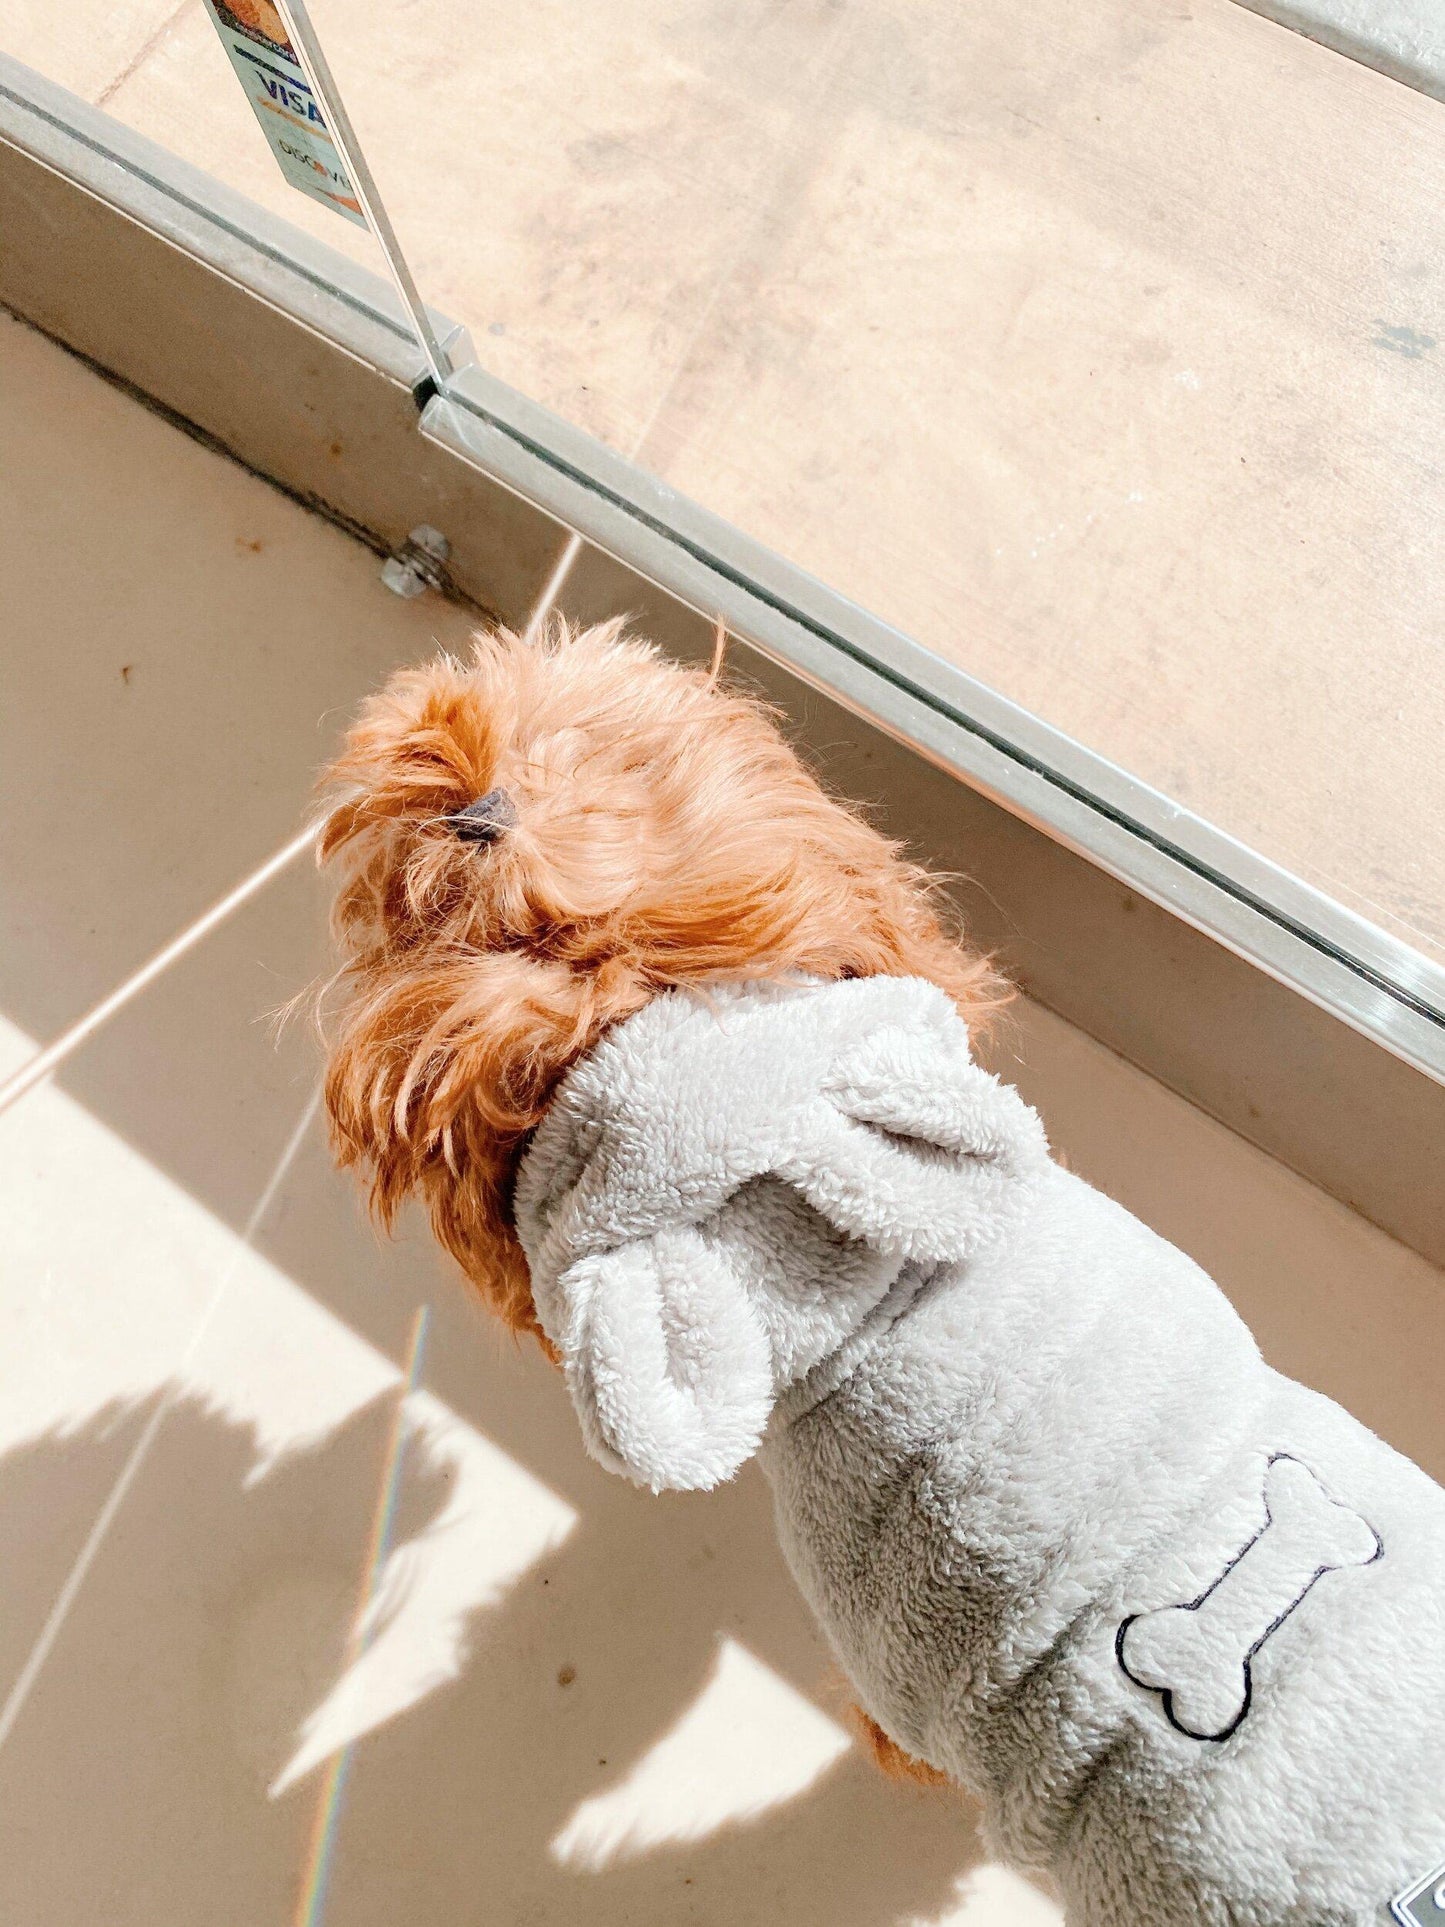 PET fluffy embroidered hoodies